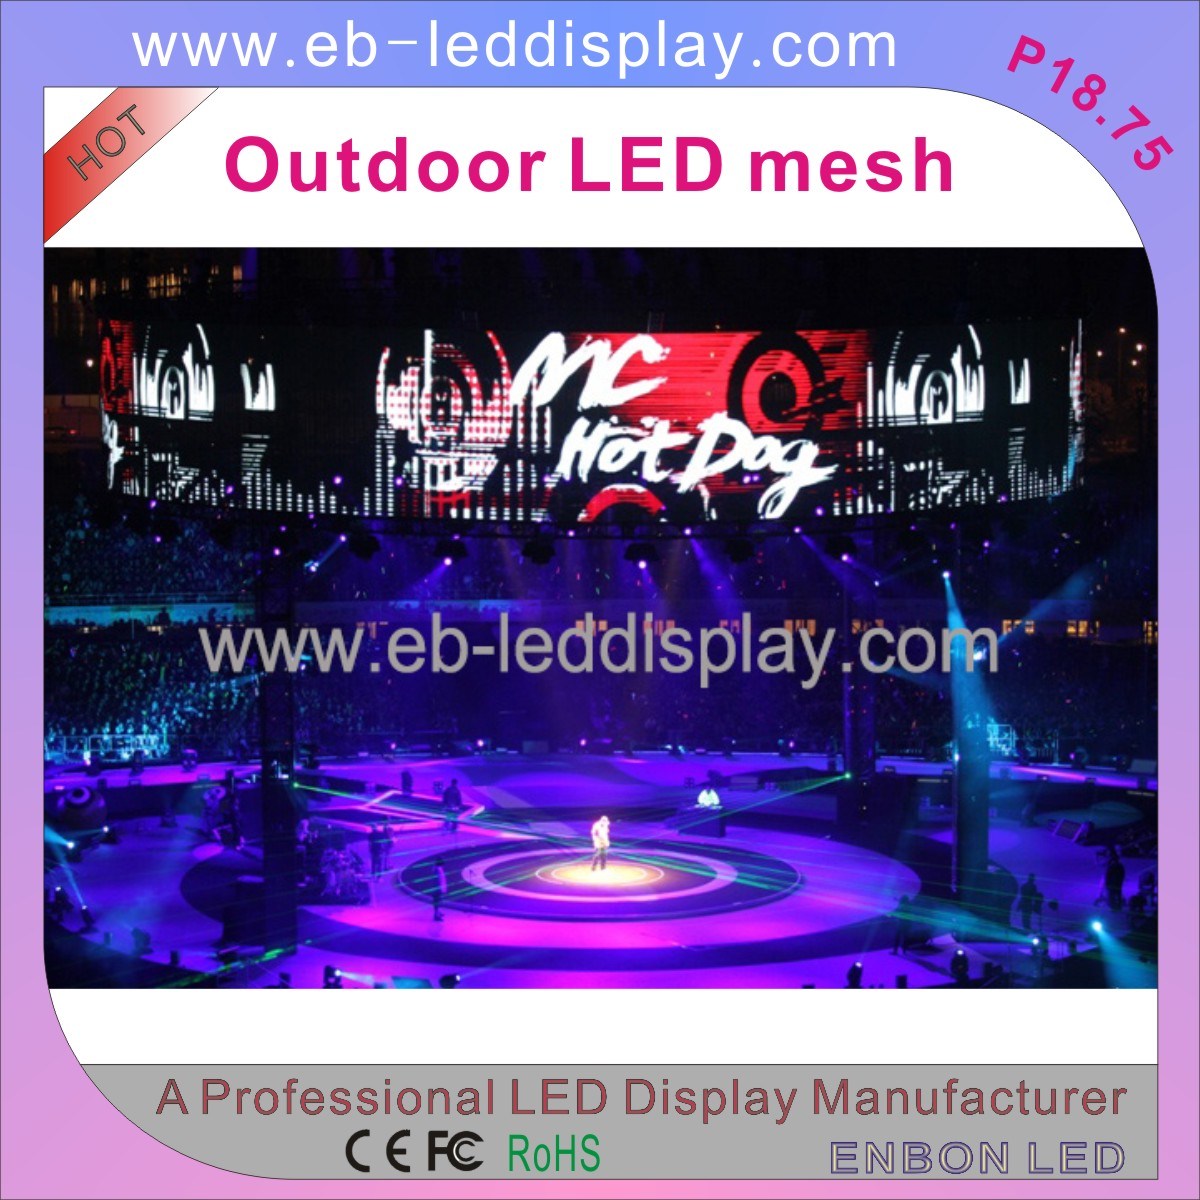 P18.75 Outdoor LED Curtain Display for Stage and Nigh Club (high transparency)